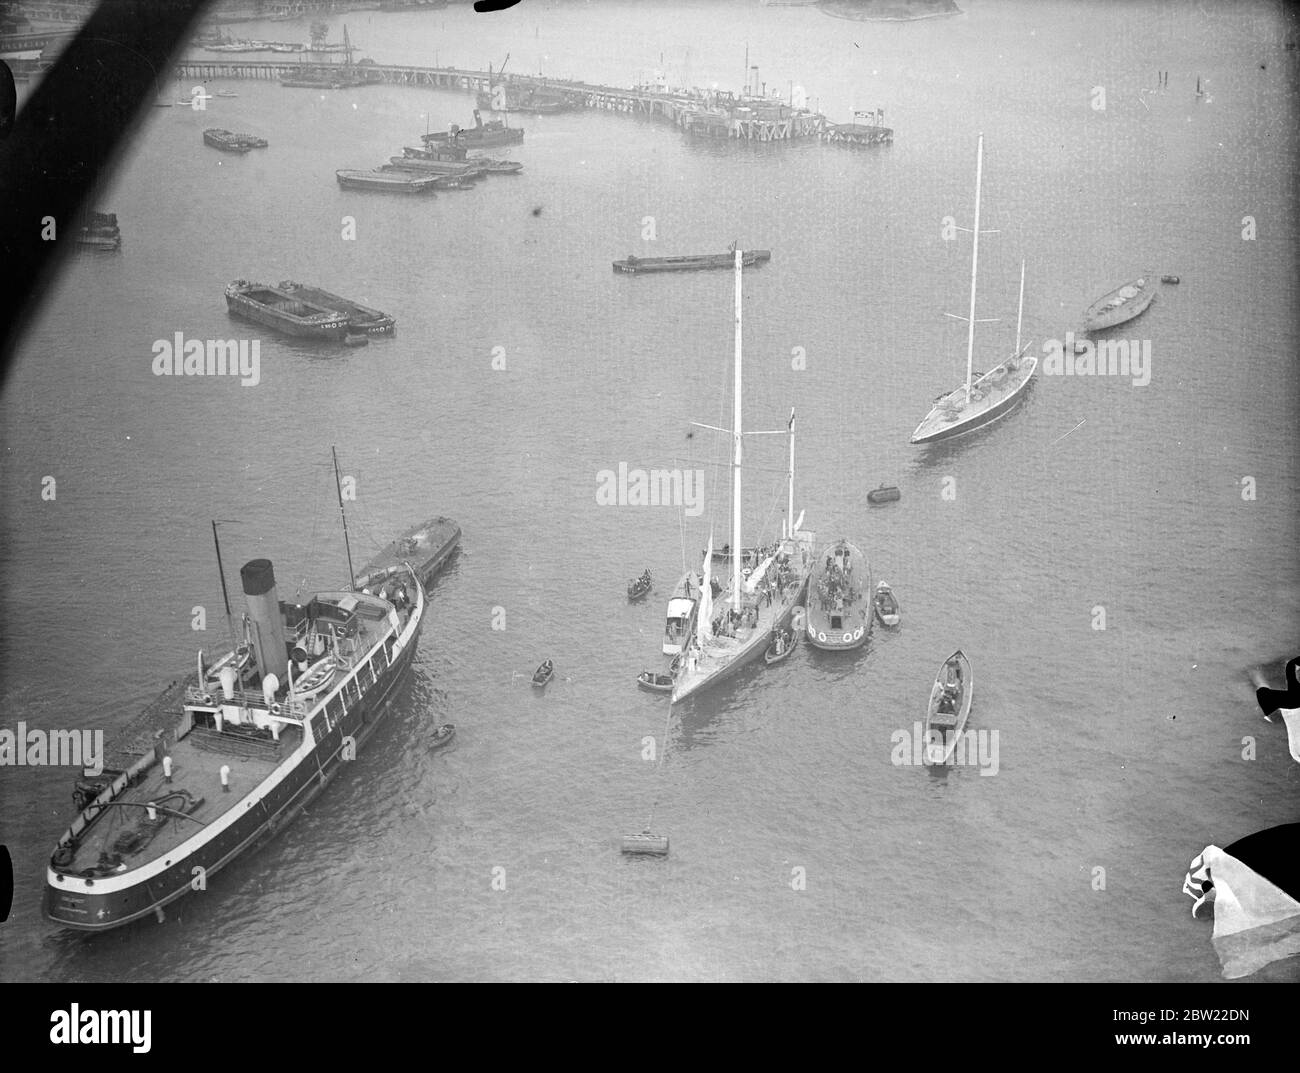 A view from the air as other craft flocked around the yacht to welcome her on her arrival. Captain Nad Heard, master of the endeavour I, after bringing their yachts safely into port in Hampshire. After their lone 2000 mile voyage across the Atlantic. 1 October 1937. Stock Photo